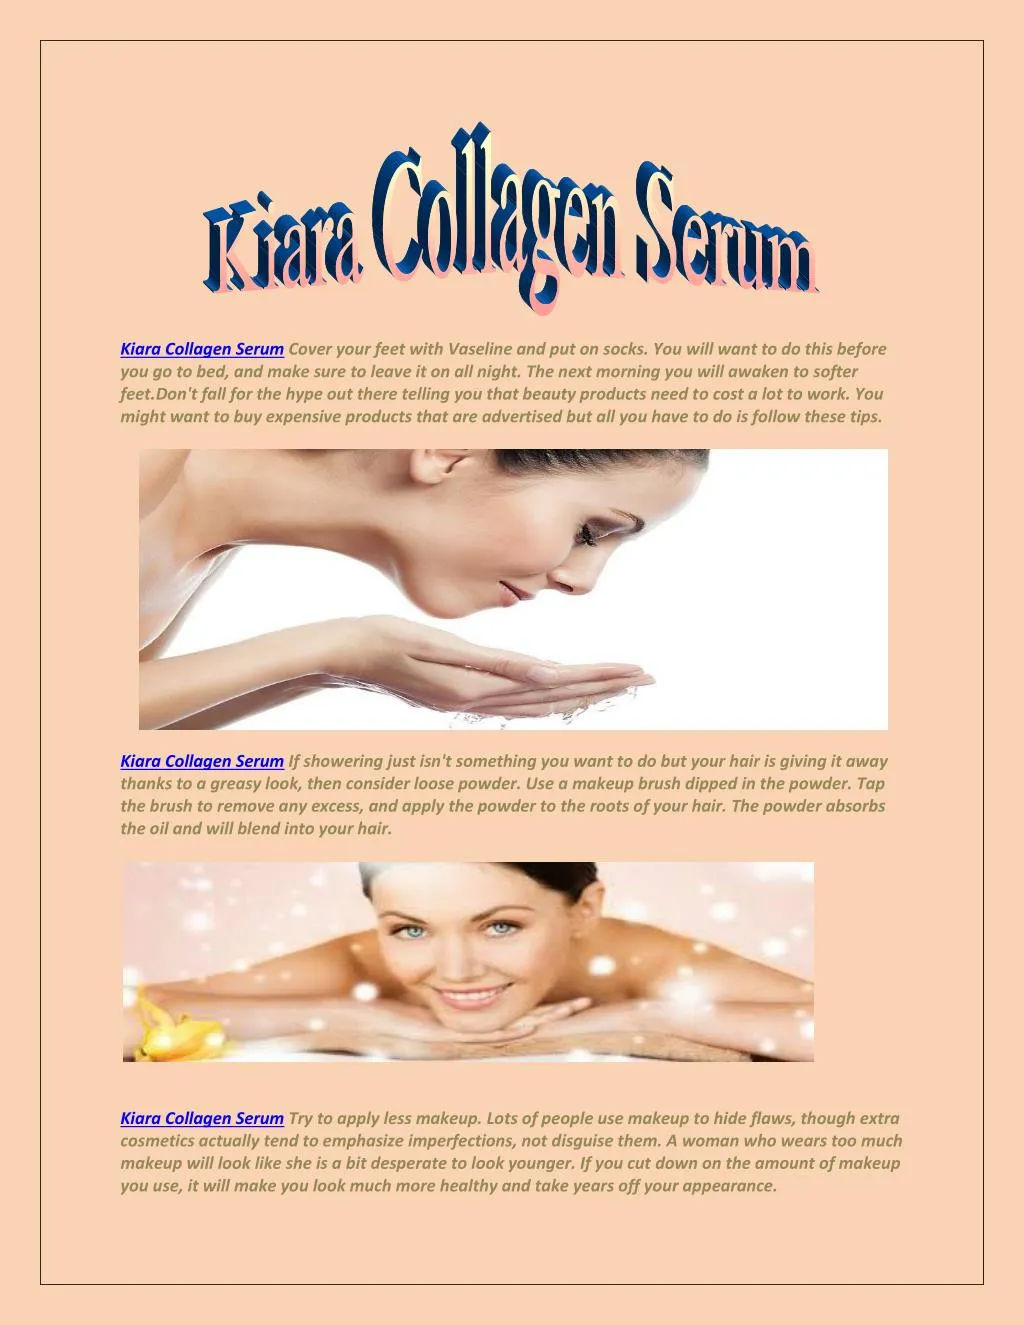 kiara collagen serum cover your feet with